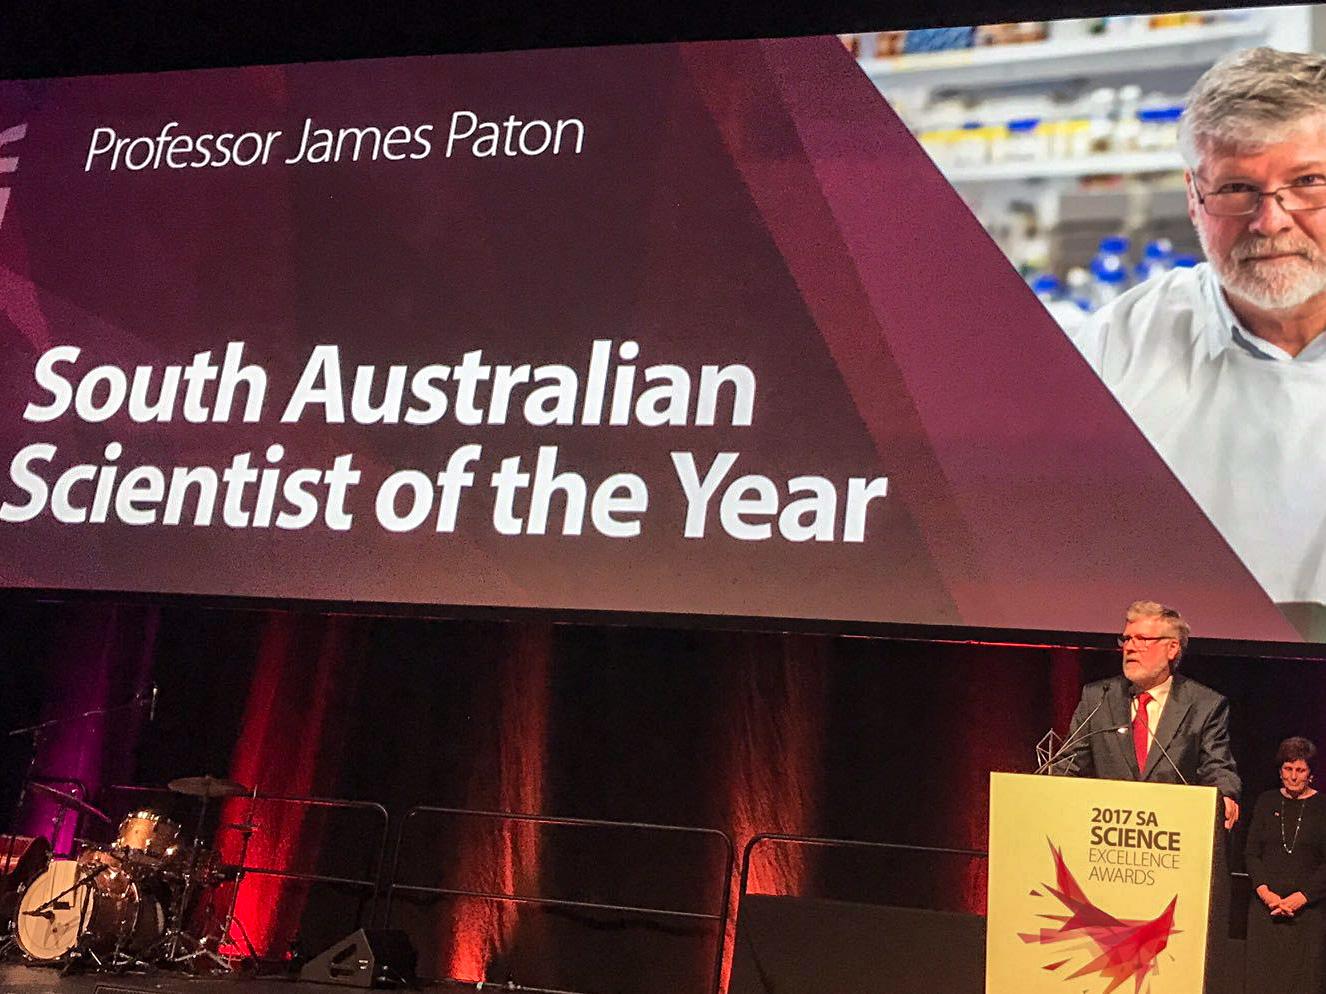 James Paton Scientist of the Year